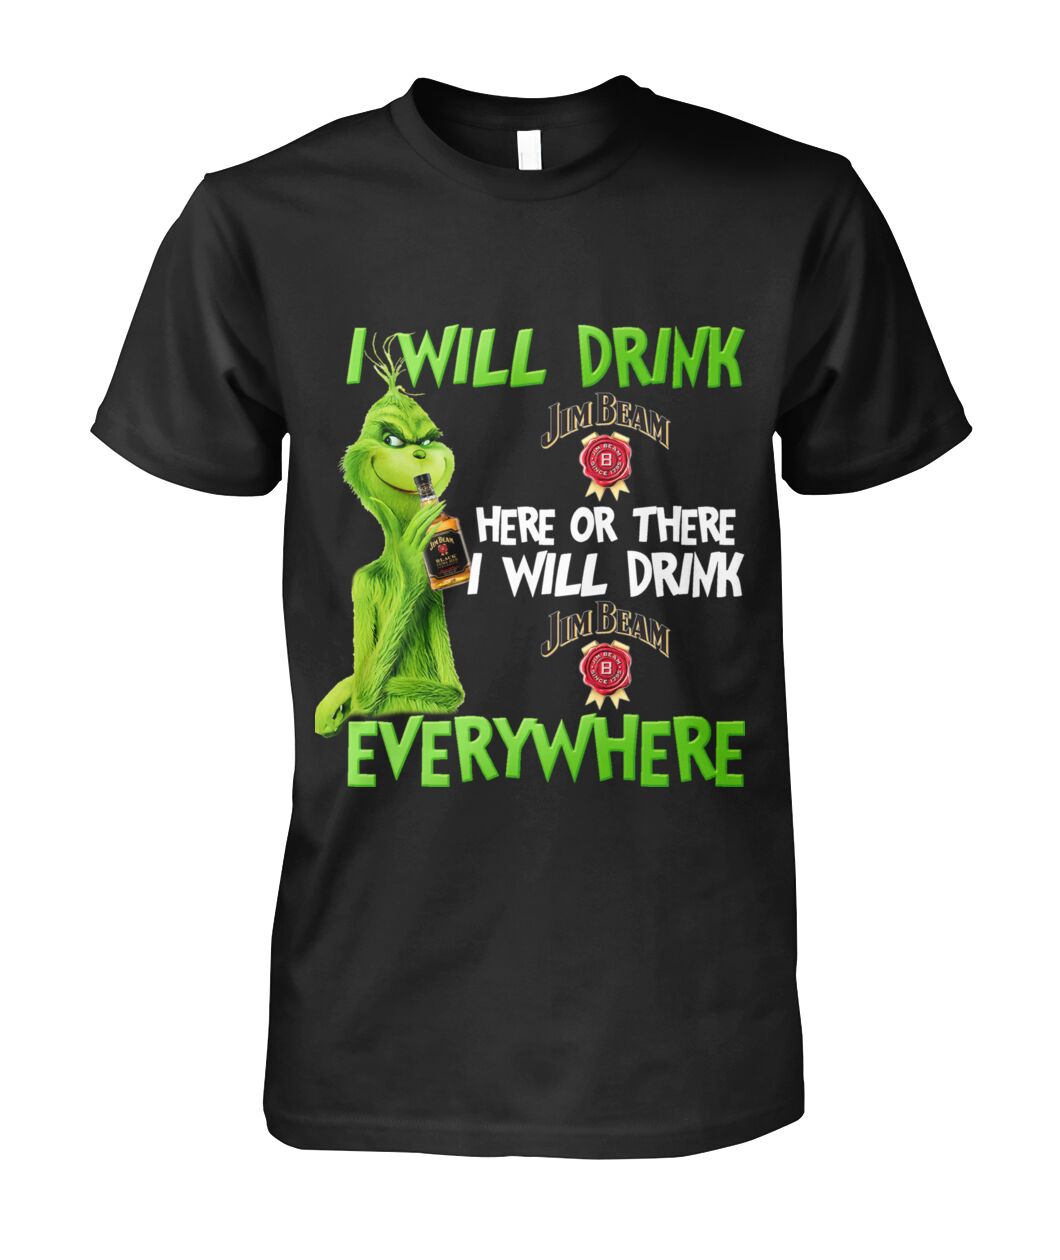 Grinch I will drink Jim Beam here or there i will drink Jim Beam everywhere shirt hoodie 1